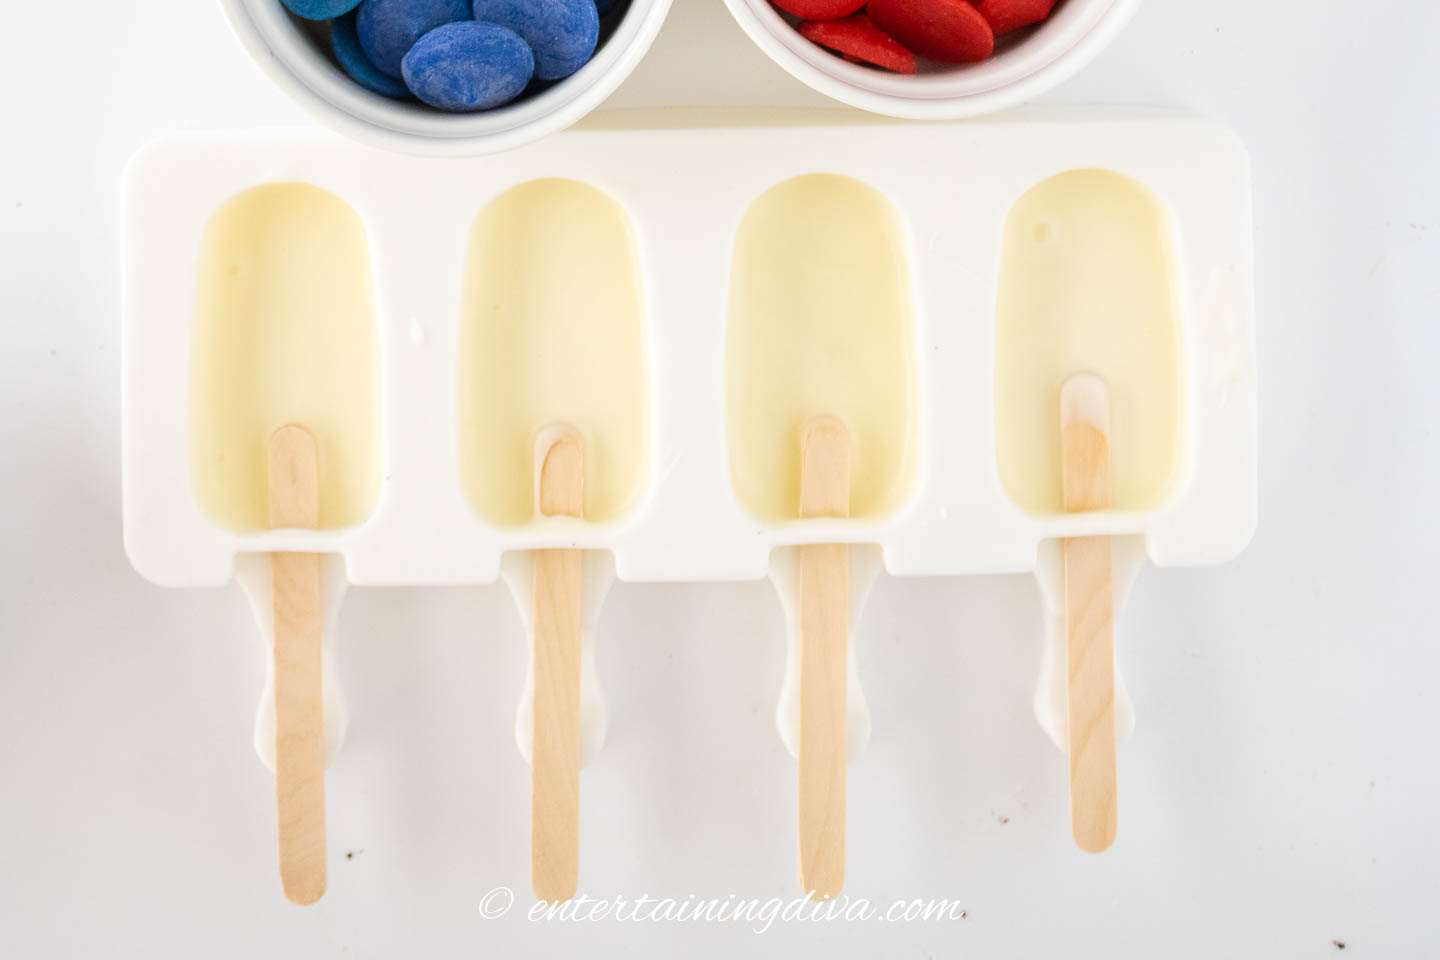 White chocolate in cakesicle molds with popsicle sticks